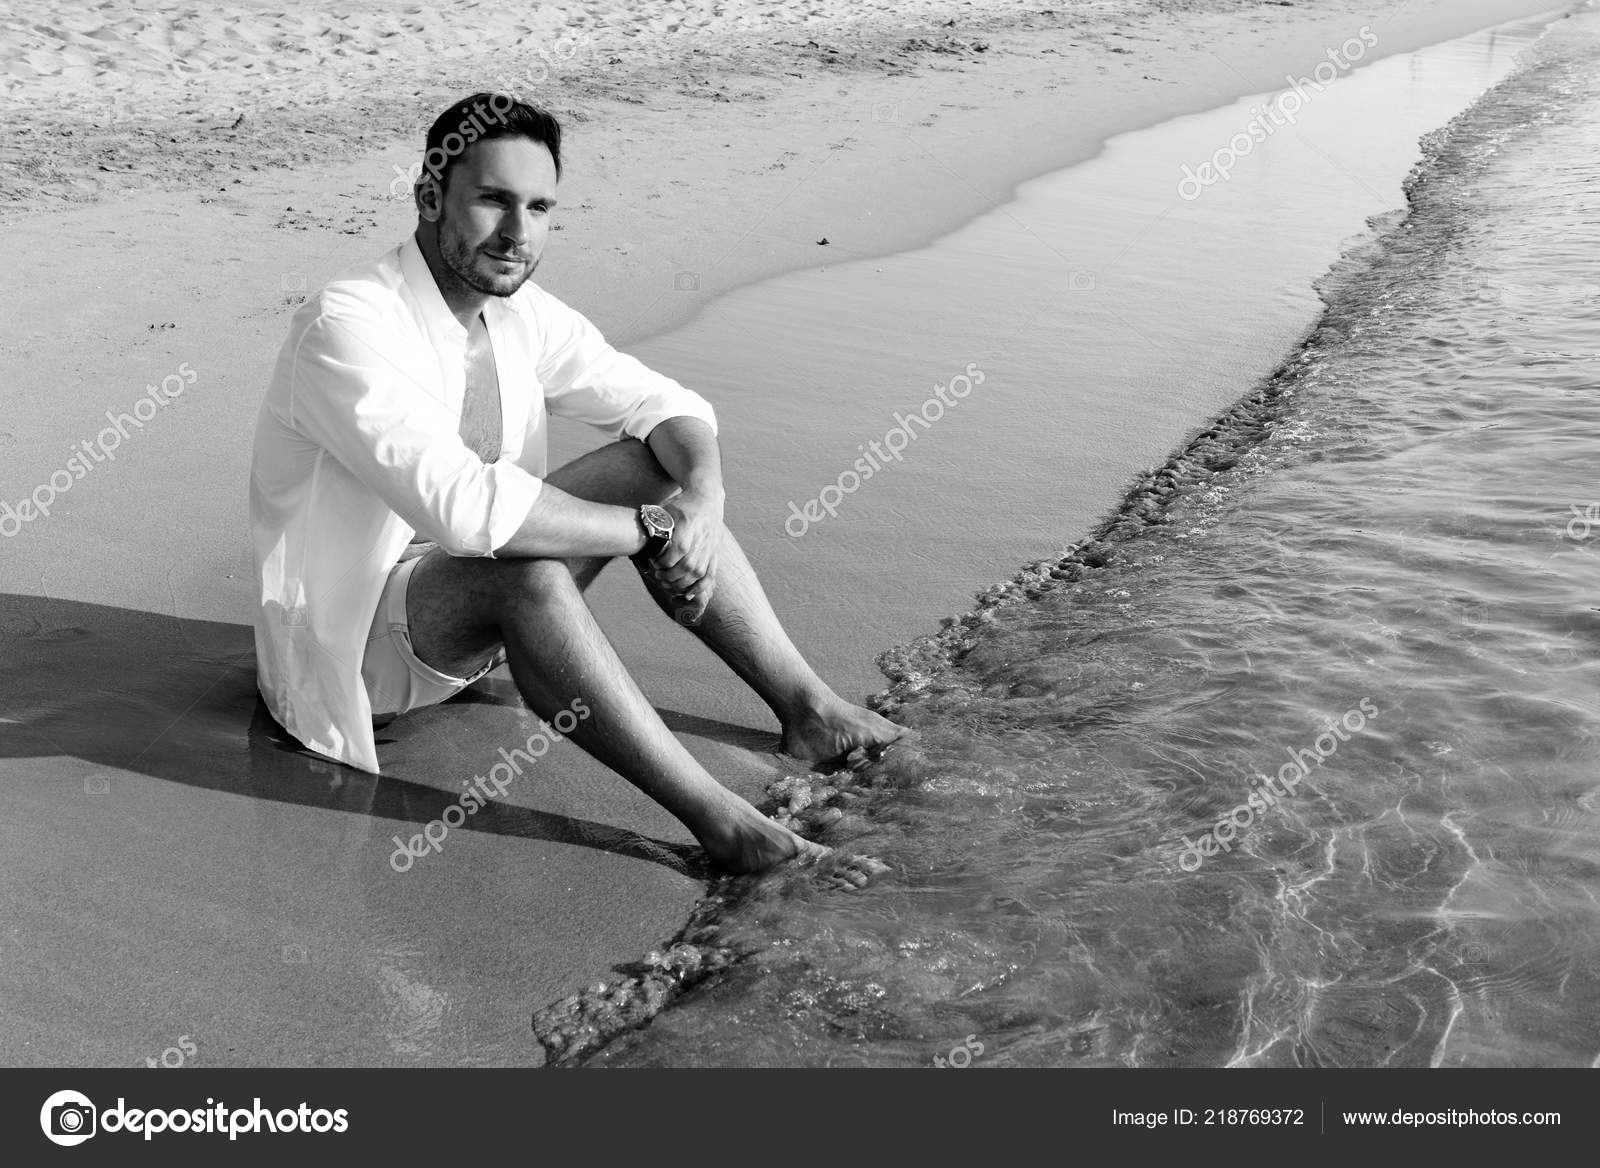 Handsome man in white shirt standing on a beach seaside looking hot on  summer day enjoying